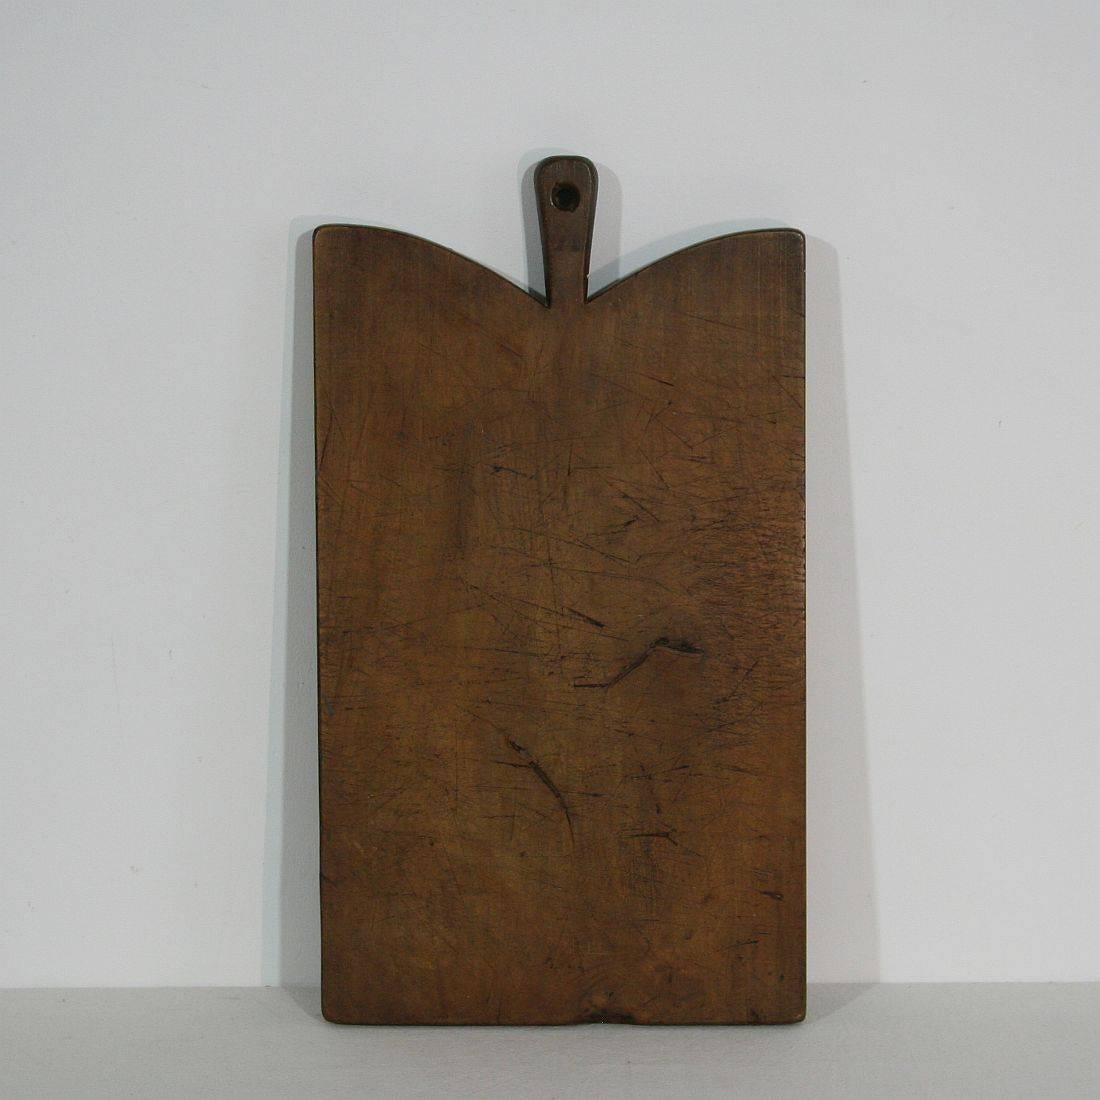 French Provincial Collection of Three Rare French 19th Century, Wooden Chopping / Cutting Boards